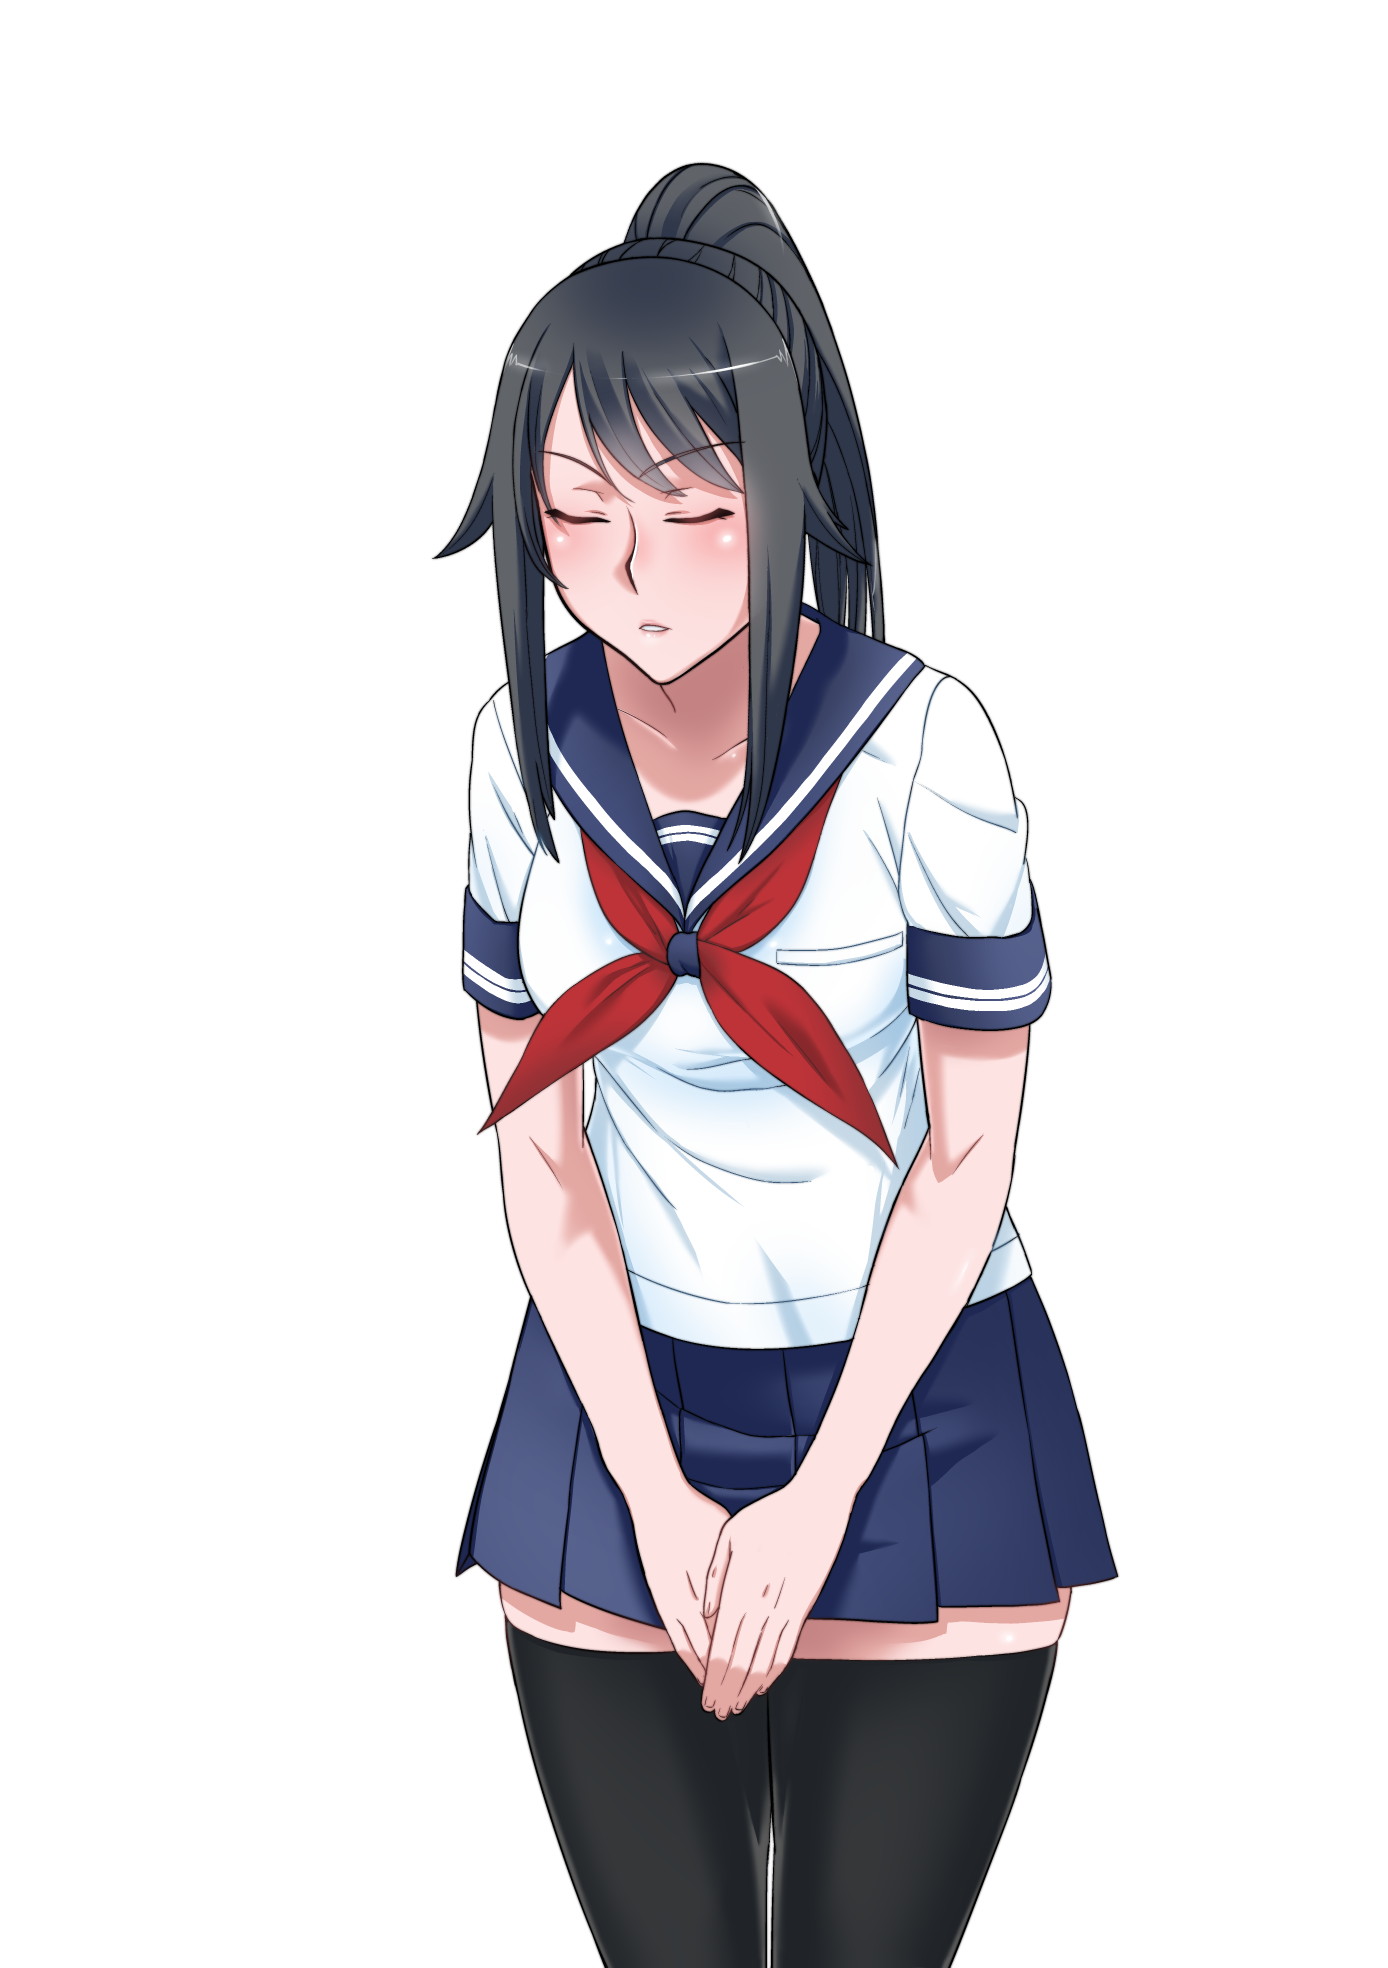 Image Apologypng Yandere Simulator Wiki Fandom Powered By Wikia